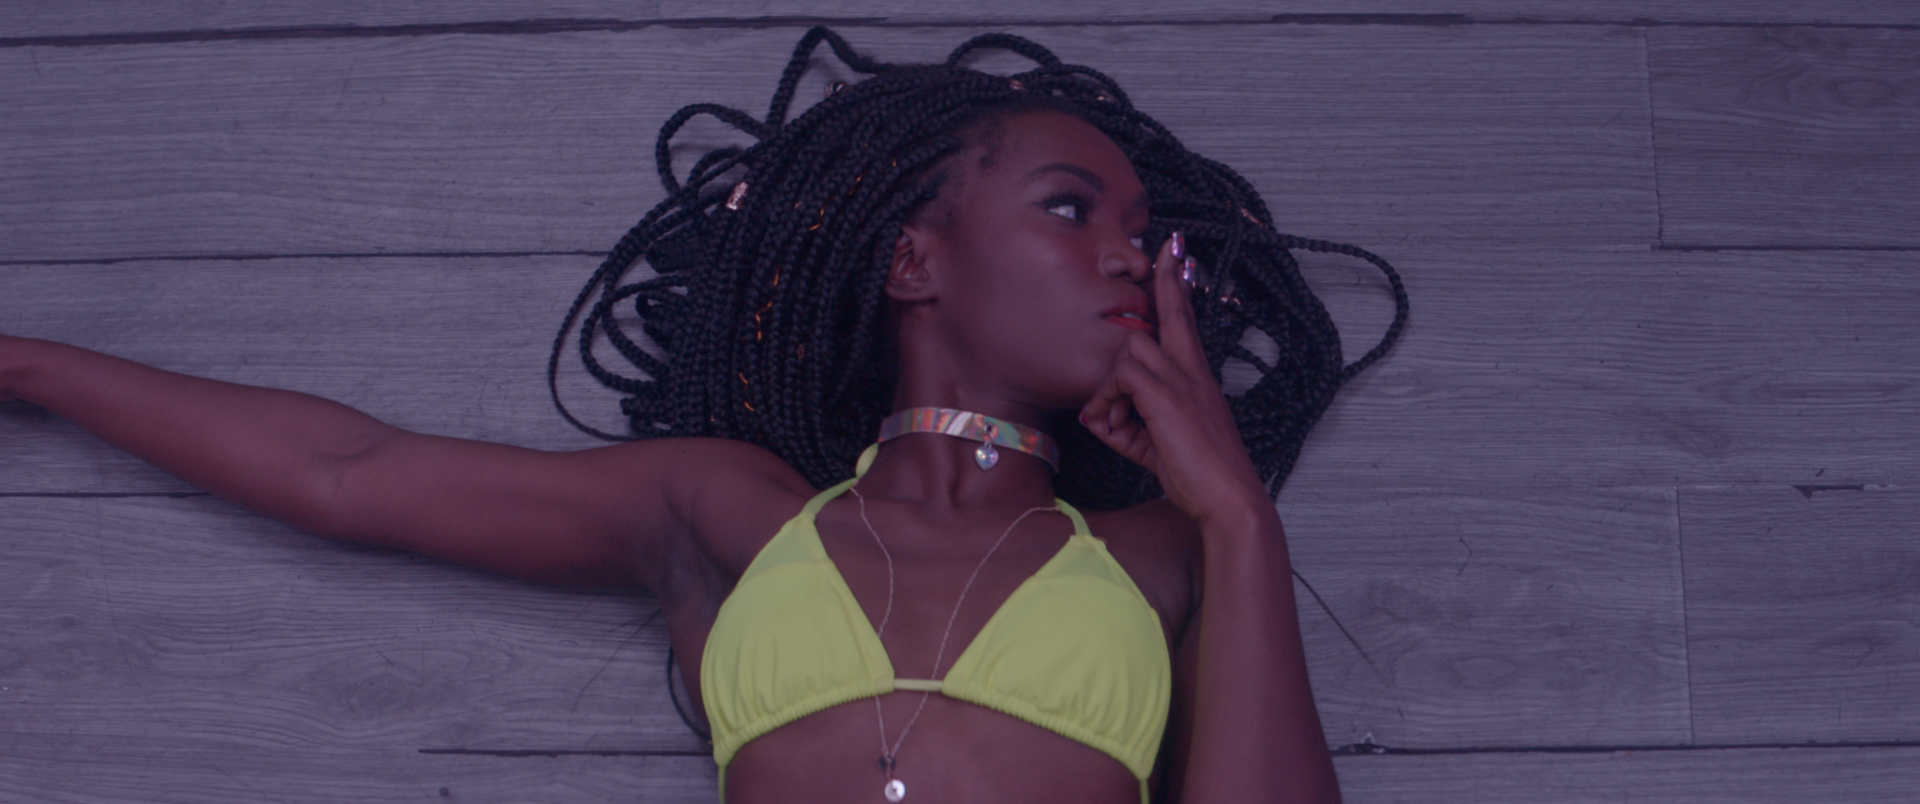 A still from She Paradise by Maya Cozier shows a Black person laying down and raising a finger to their lips while looking left, wearing a yellow-neon bikini top.